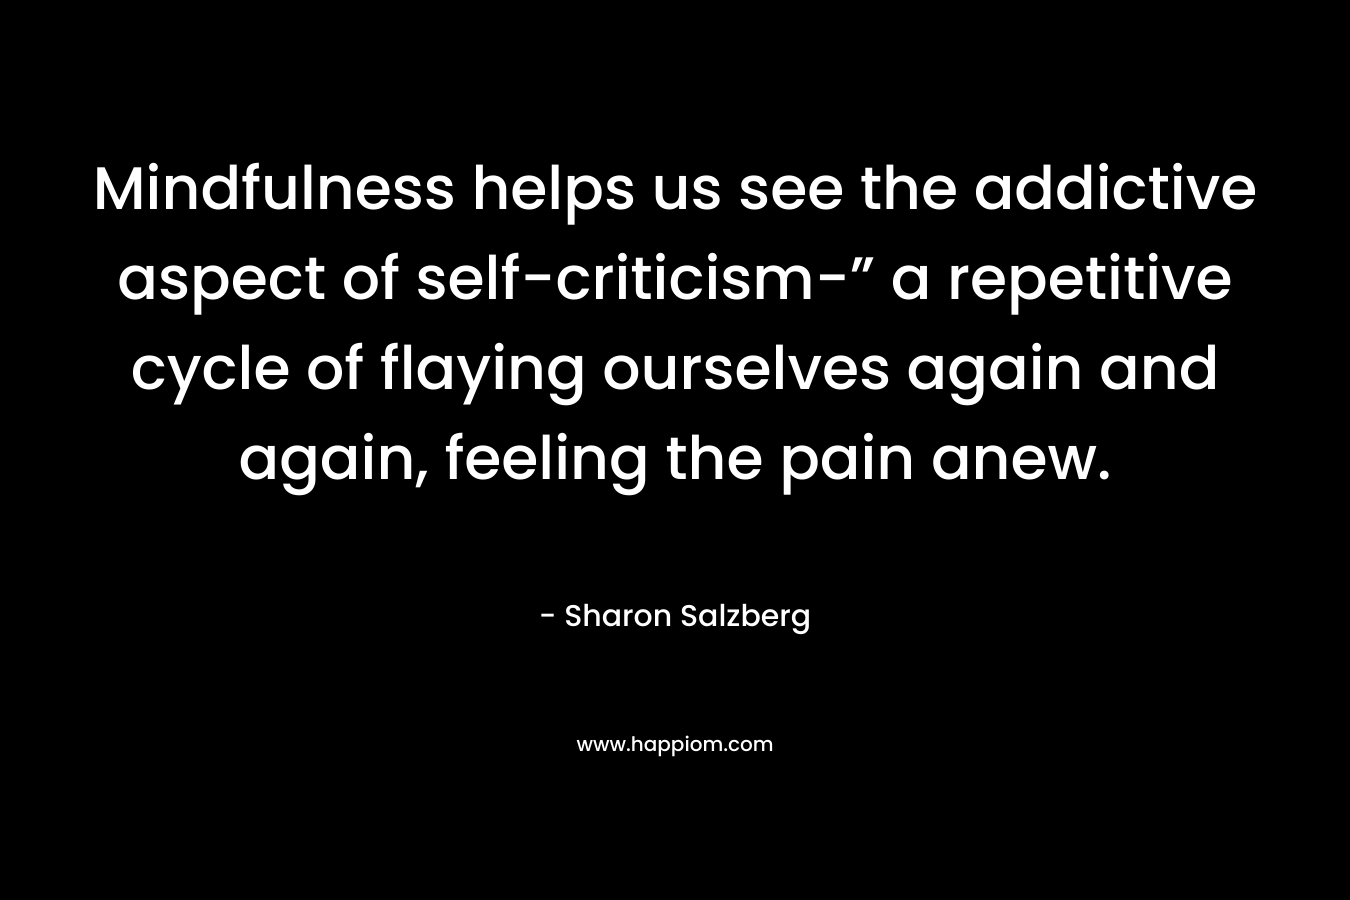 Mindfulness helps us see the addictive aspect of self-criticism-” a repetitive cycle of flaying ourselves again and again, feeling the pain anew. – Sharon Salzberg